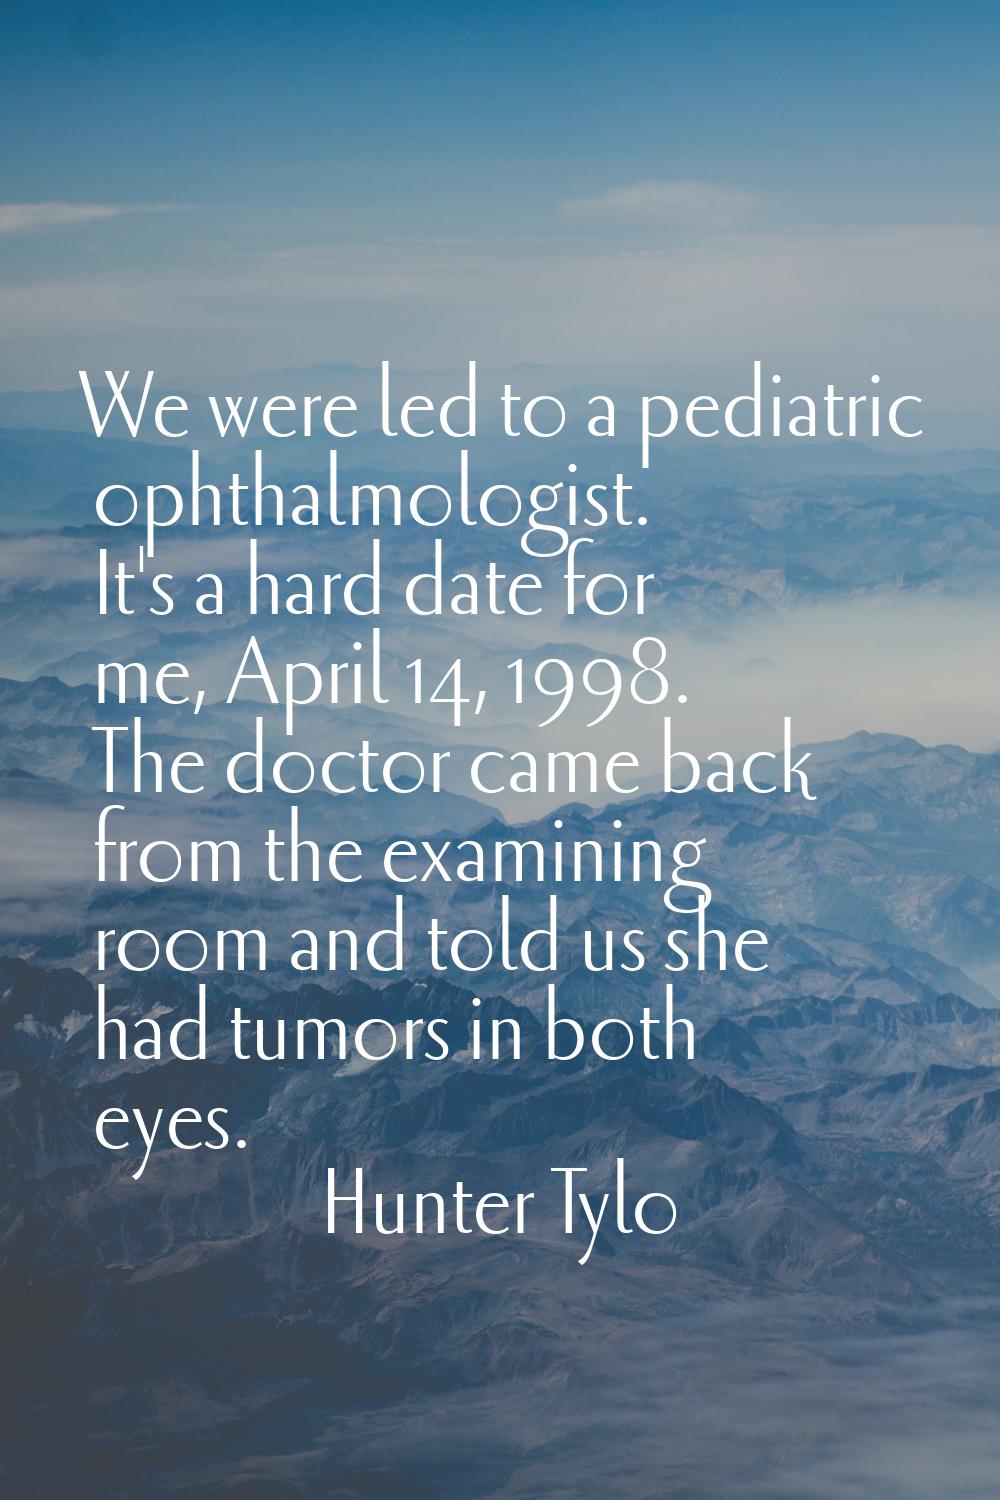 We were led to a pediatric ophthalmologist. It's a hard date for me, April 14, 1998. The doctor cam